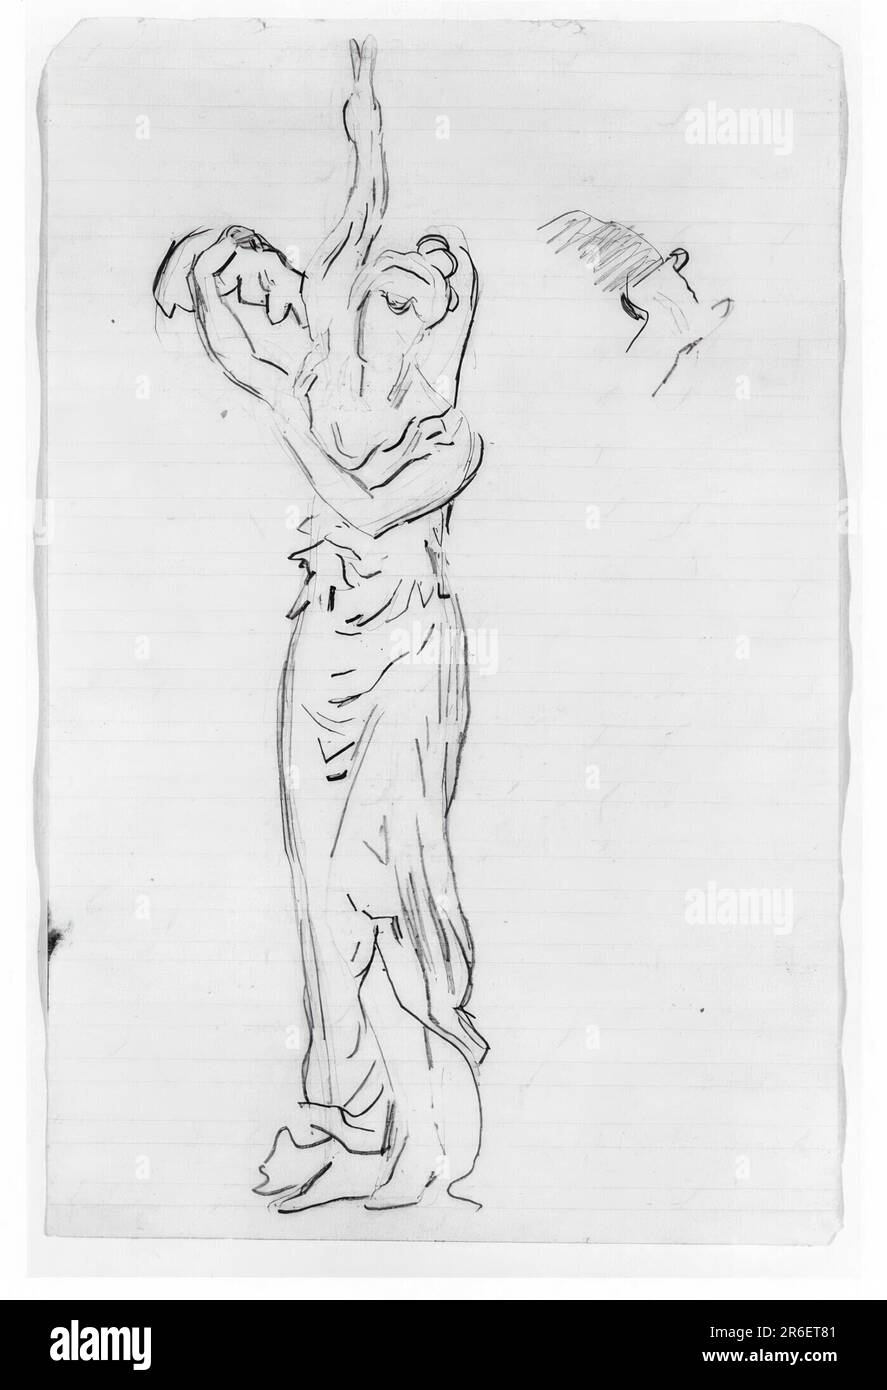 Nymph With Bittern. pencil on paper. Date: (1875-1876). Museum: HIRSHHORN MUSEUM AND SCULPTURE GARDEN. Stock Photo